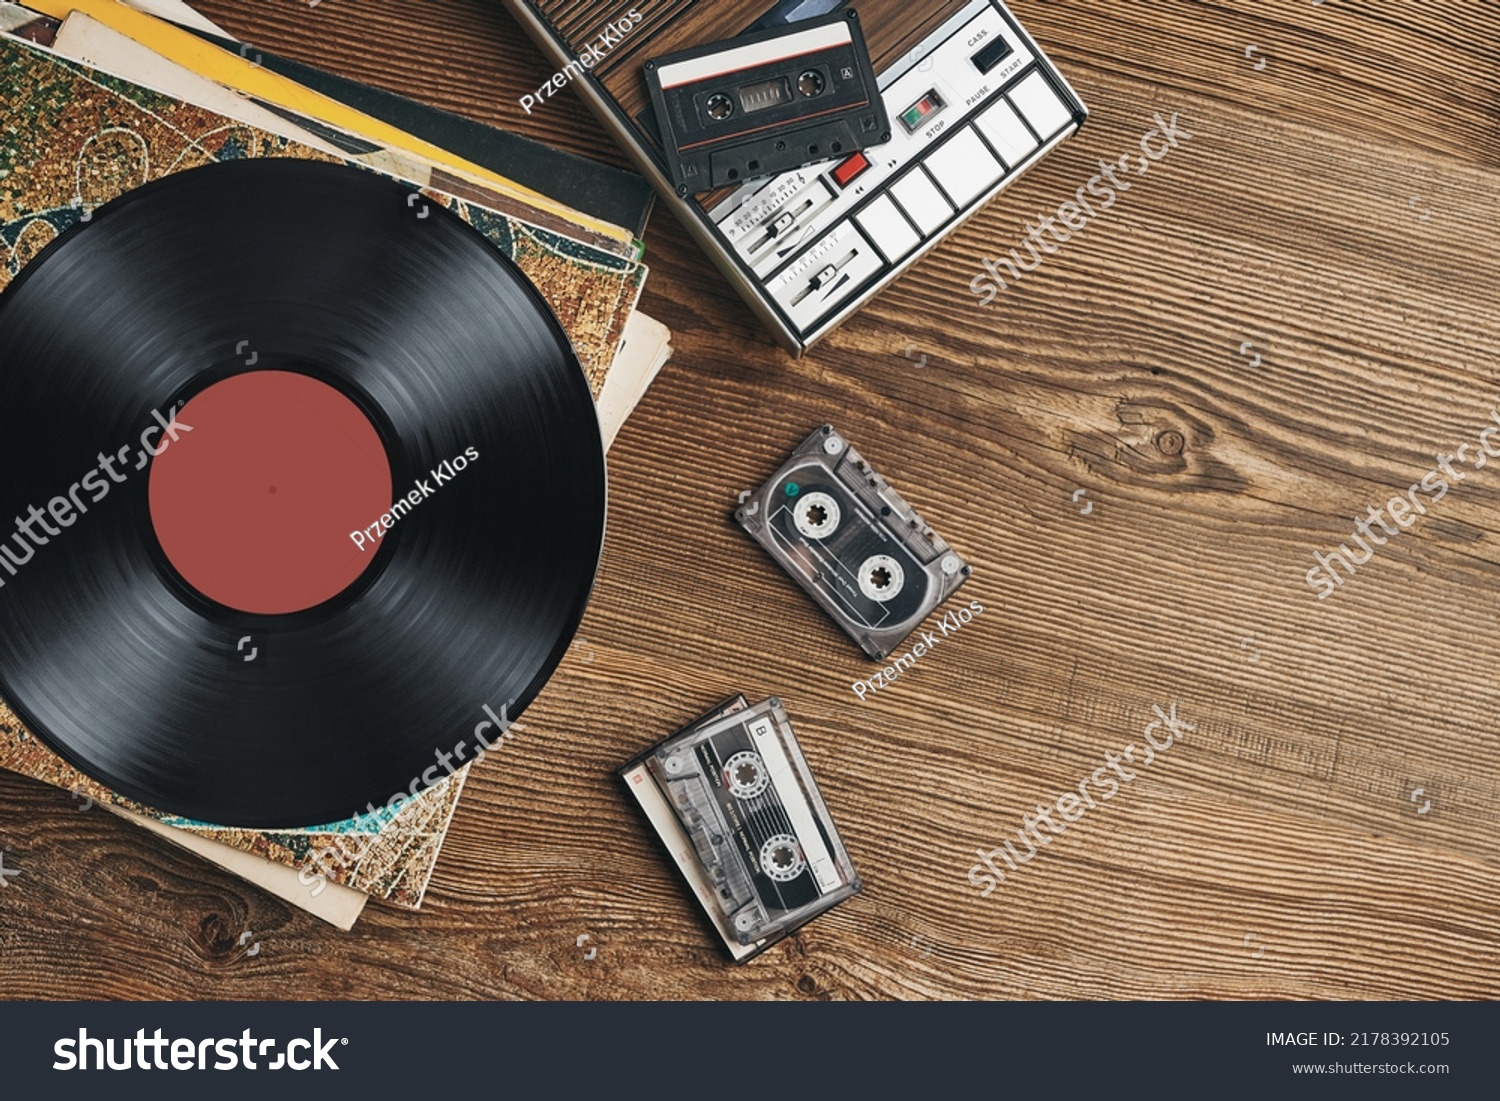 Vinyl records, cassette tapes and cassette recorder on wooden table. Retro music style. 80s music party. Vintage style. Analog equipment. Stereo sound. Back to the past #2178392105